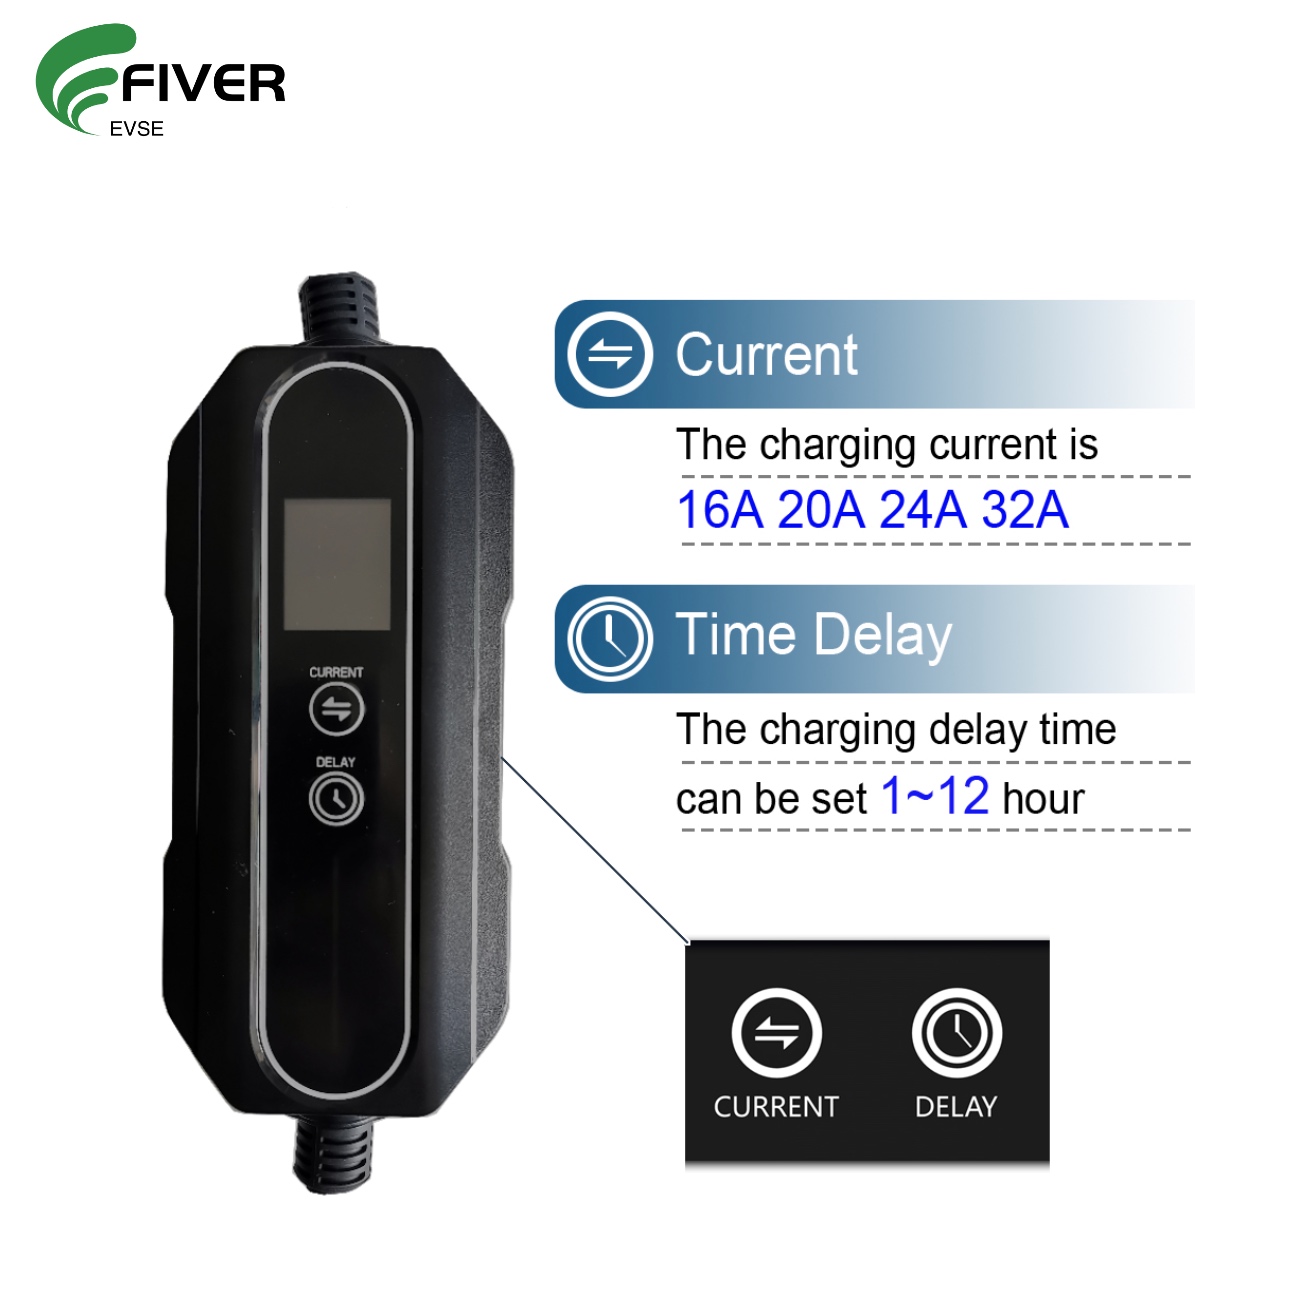 schedule charging <a href=https://fiverevse.com/Level-2--Portable--EV--Chargers.html target='_blank'>Portable EV Charger</a>